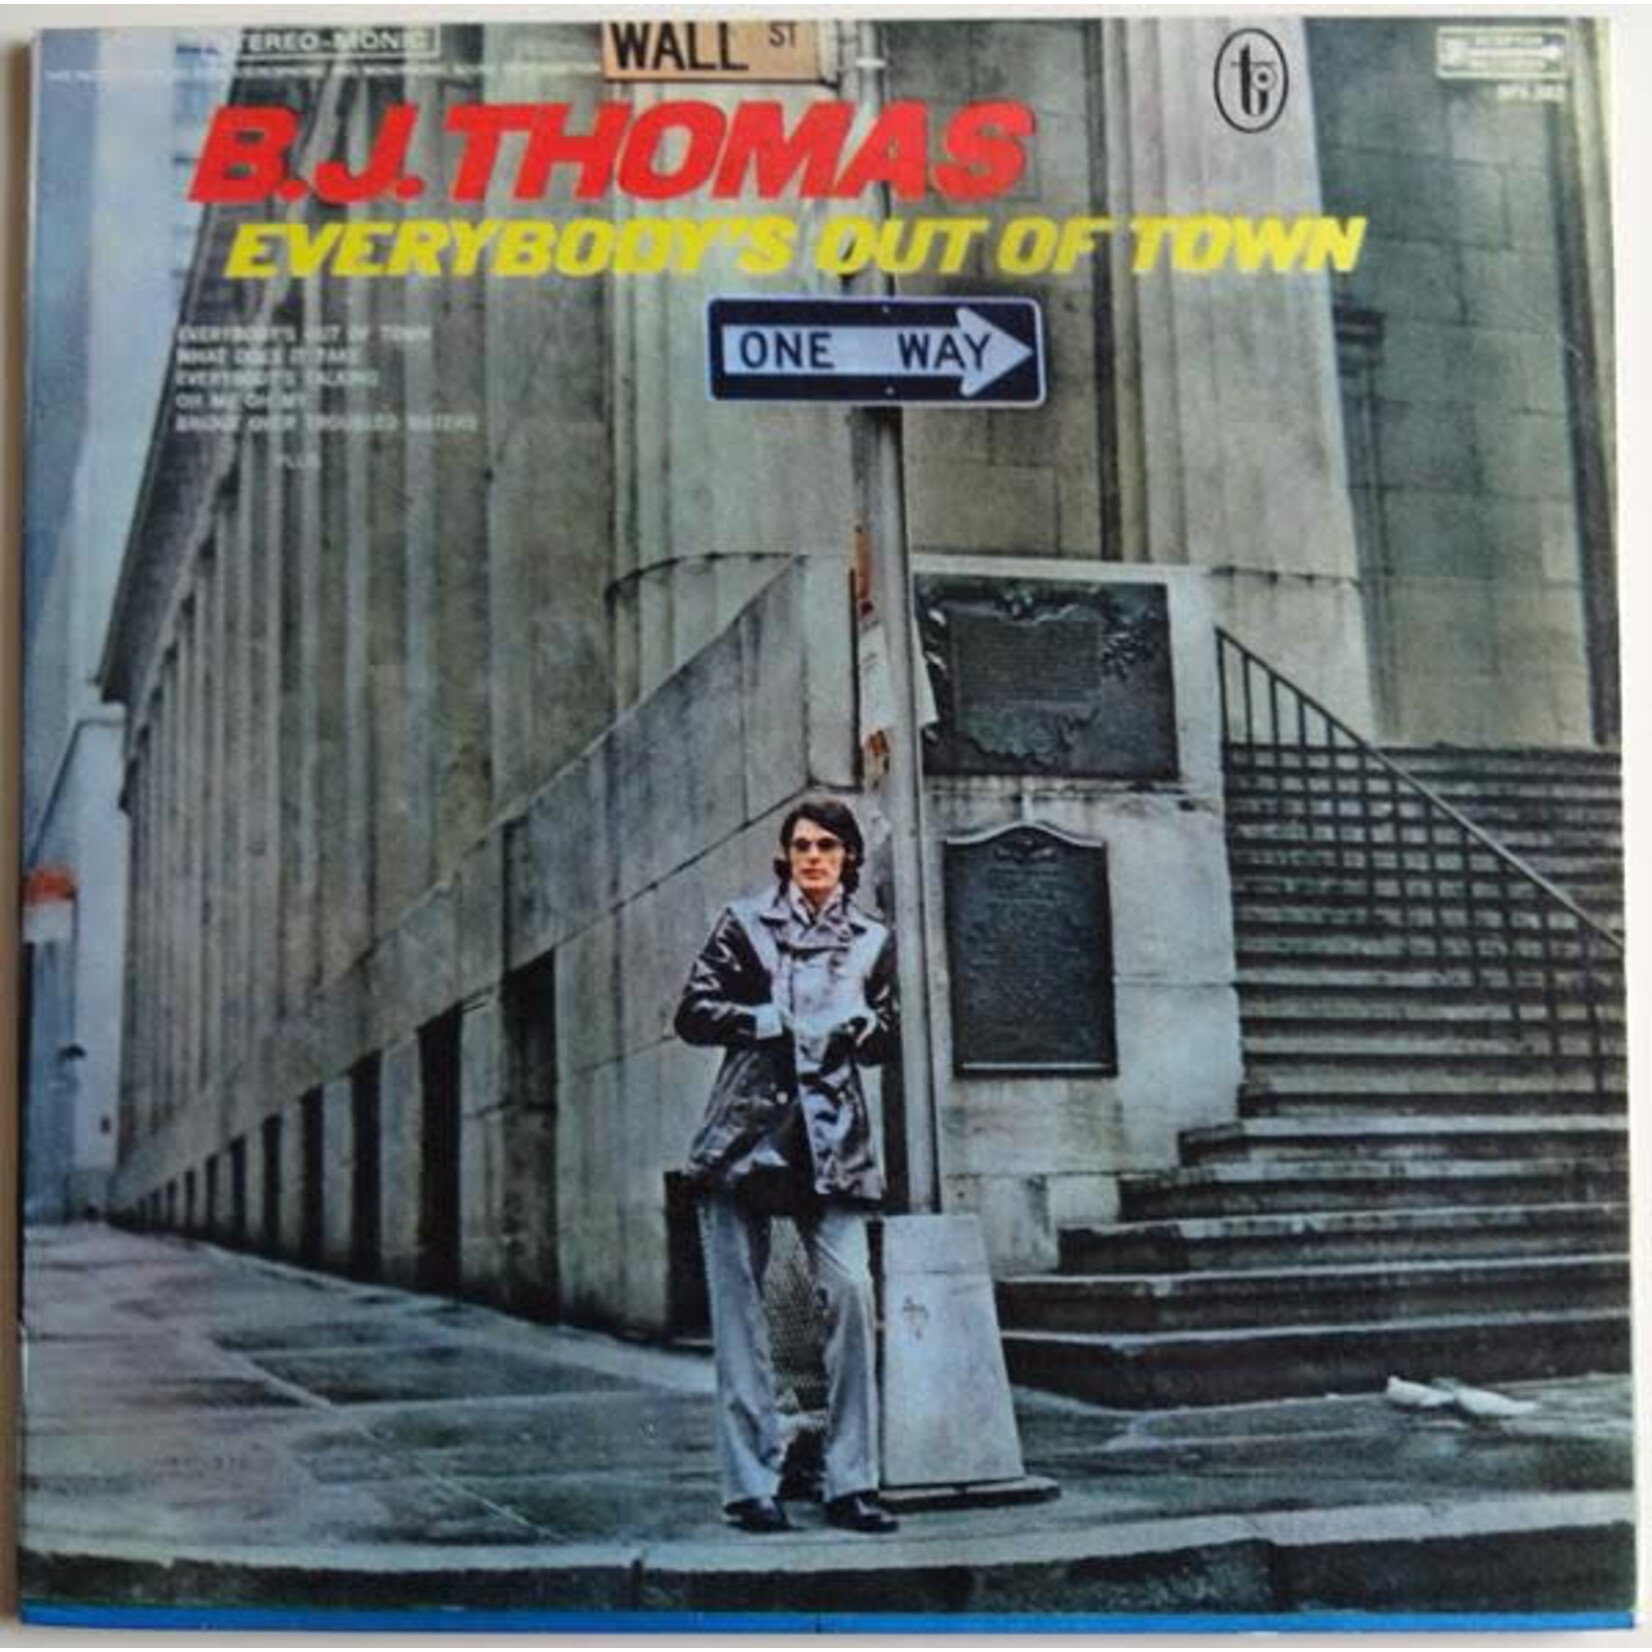 [Vintage] BJ Thomas - Everbody's Out of Town